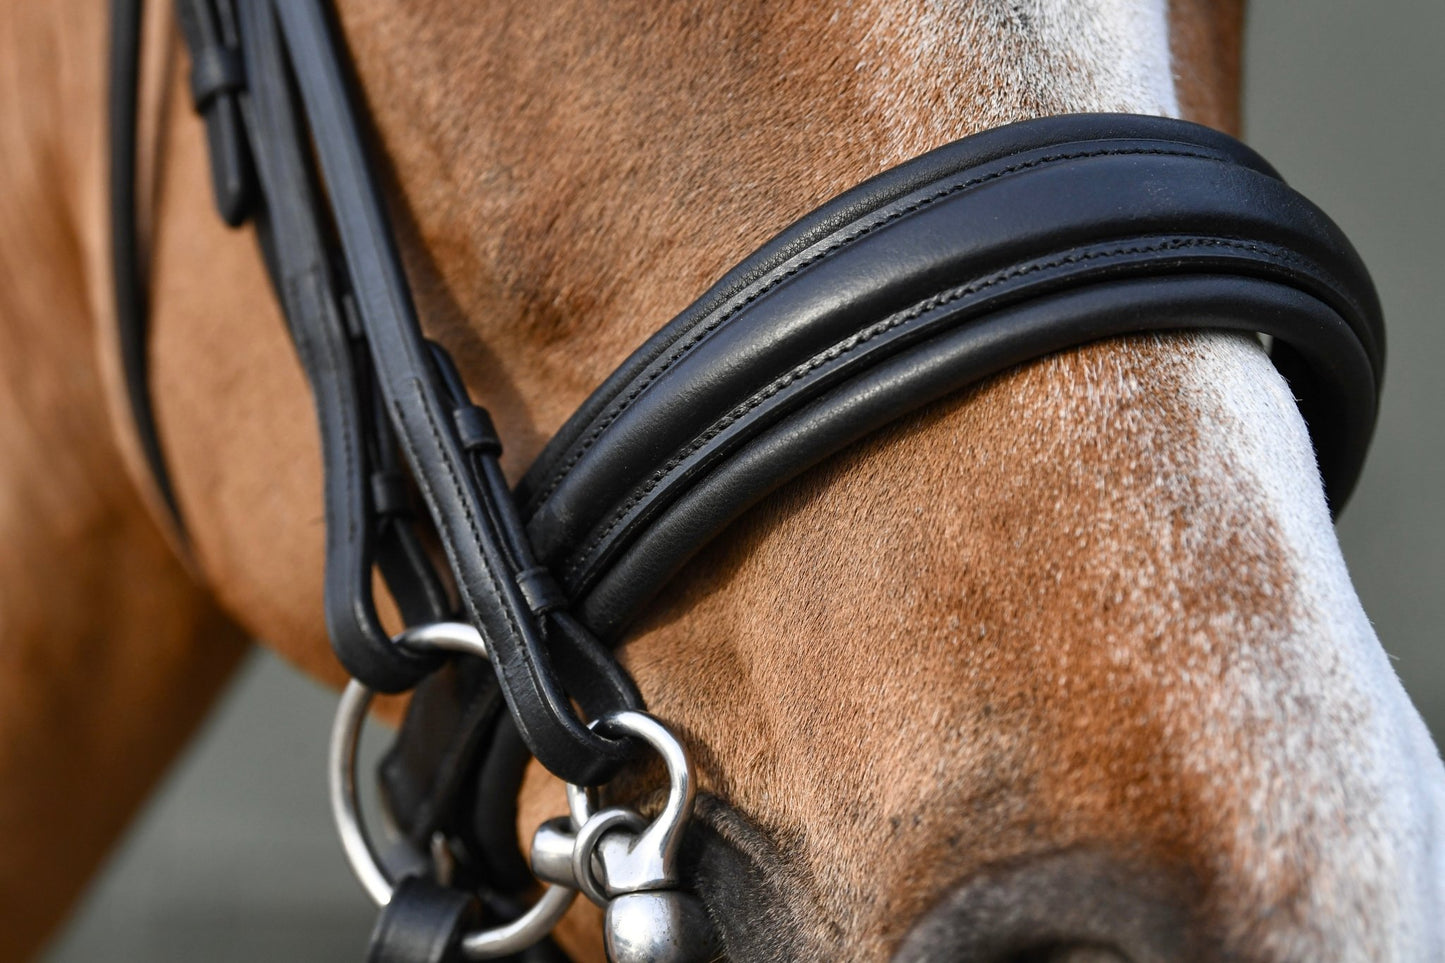 Convertible Classic Dressage Comfort Bridle, from The Urbany. Elevate your horse's style with sparkling crystals and comfort.